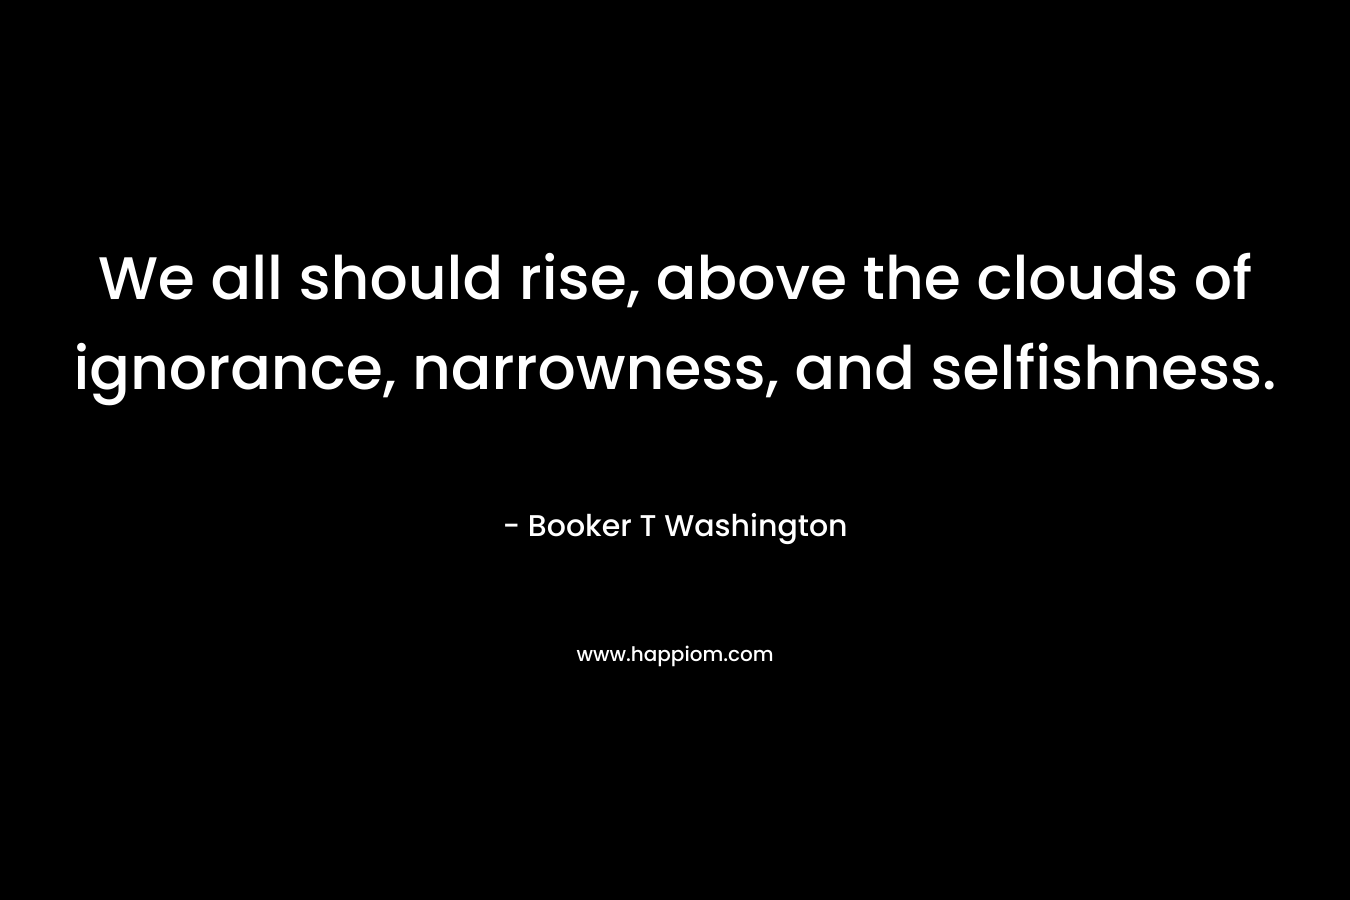 We all should rise, above the clouds of ignorance, narrowness, and selfishness. – Booker T Washington